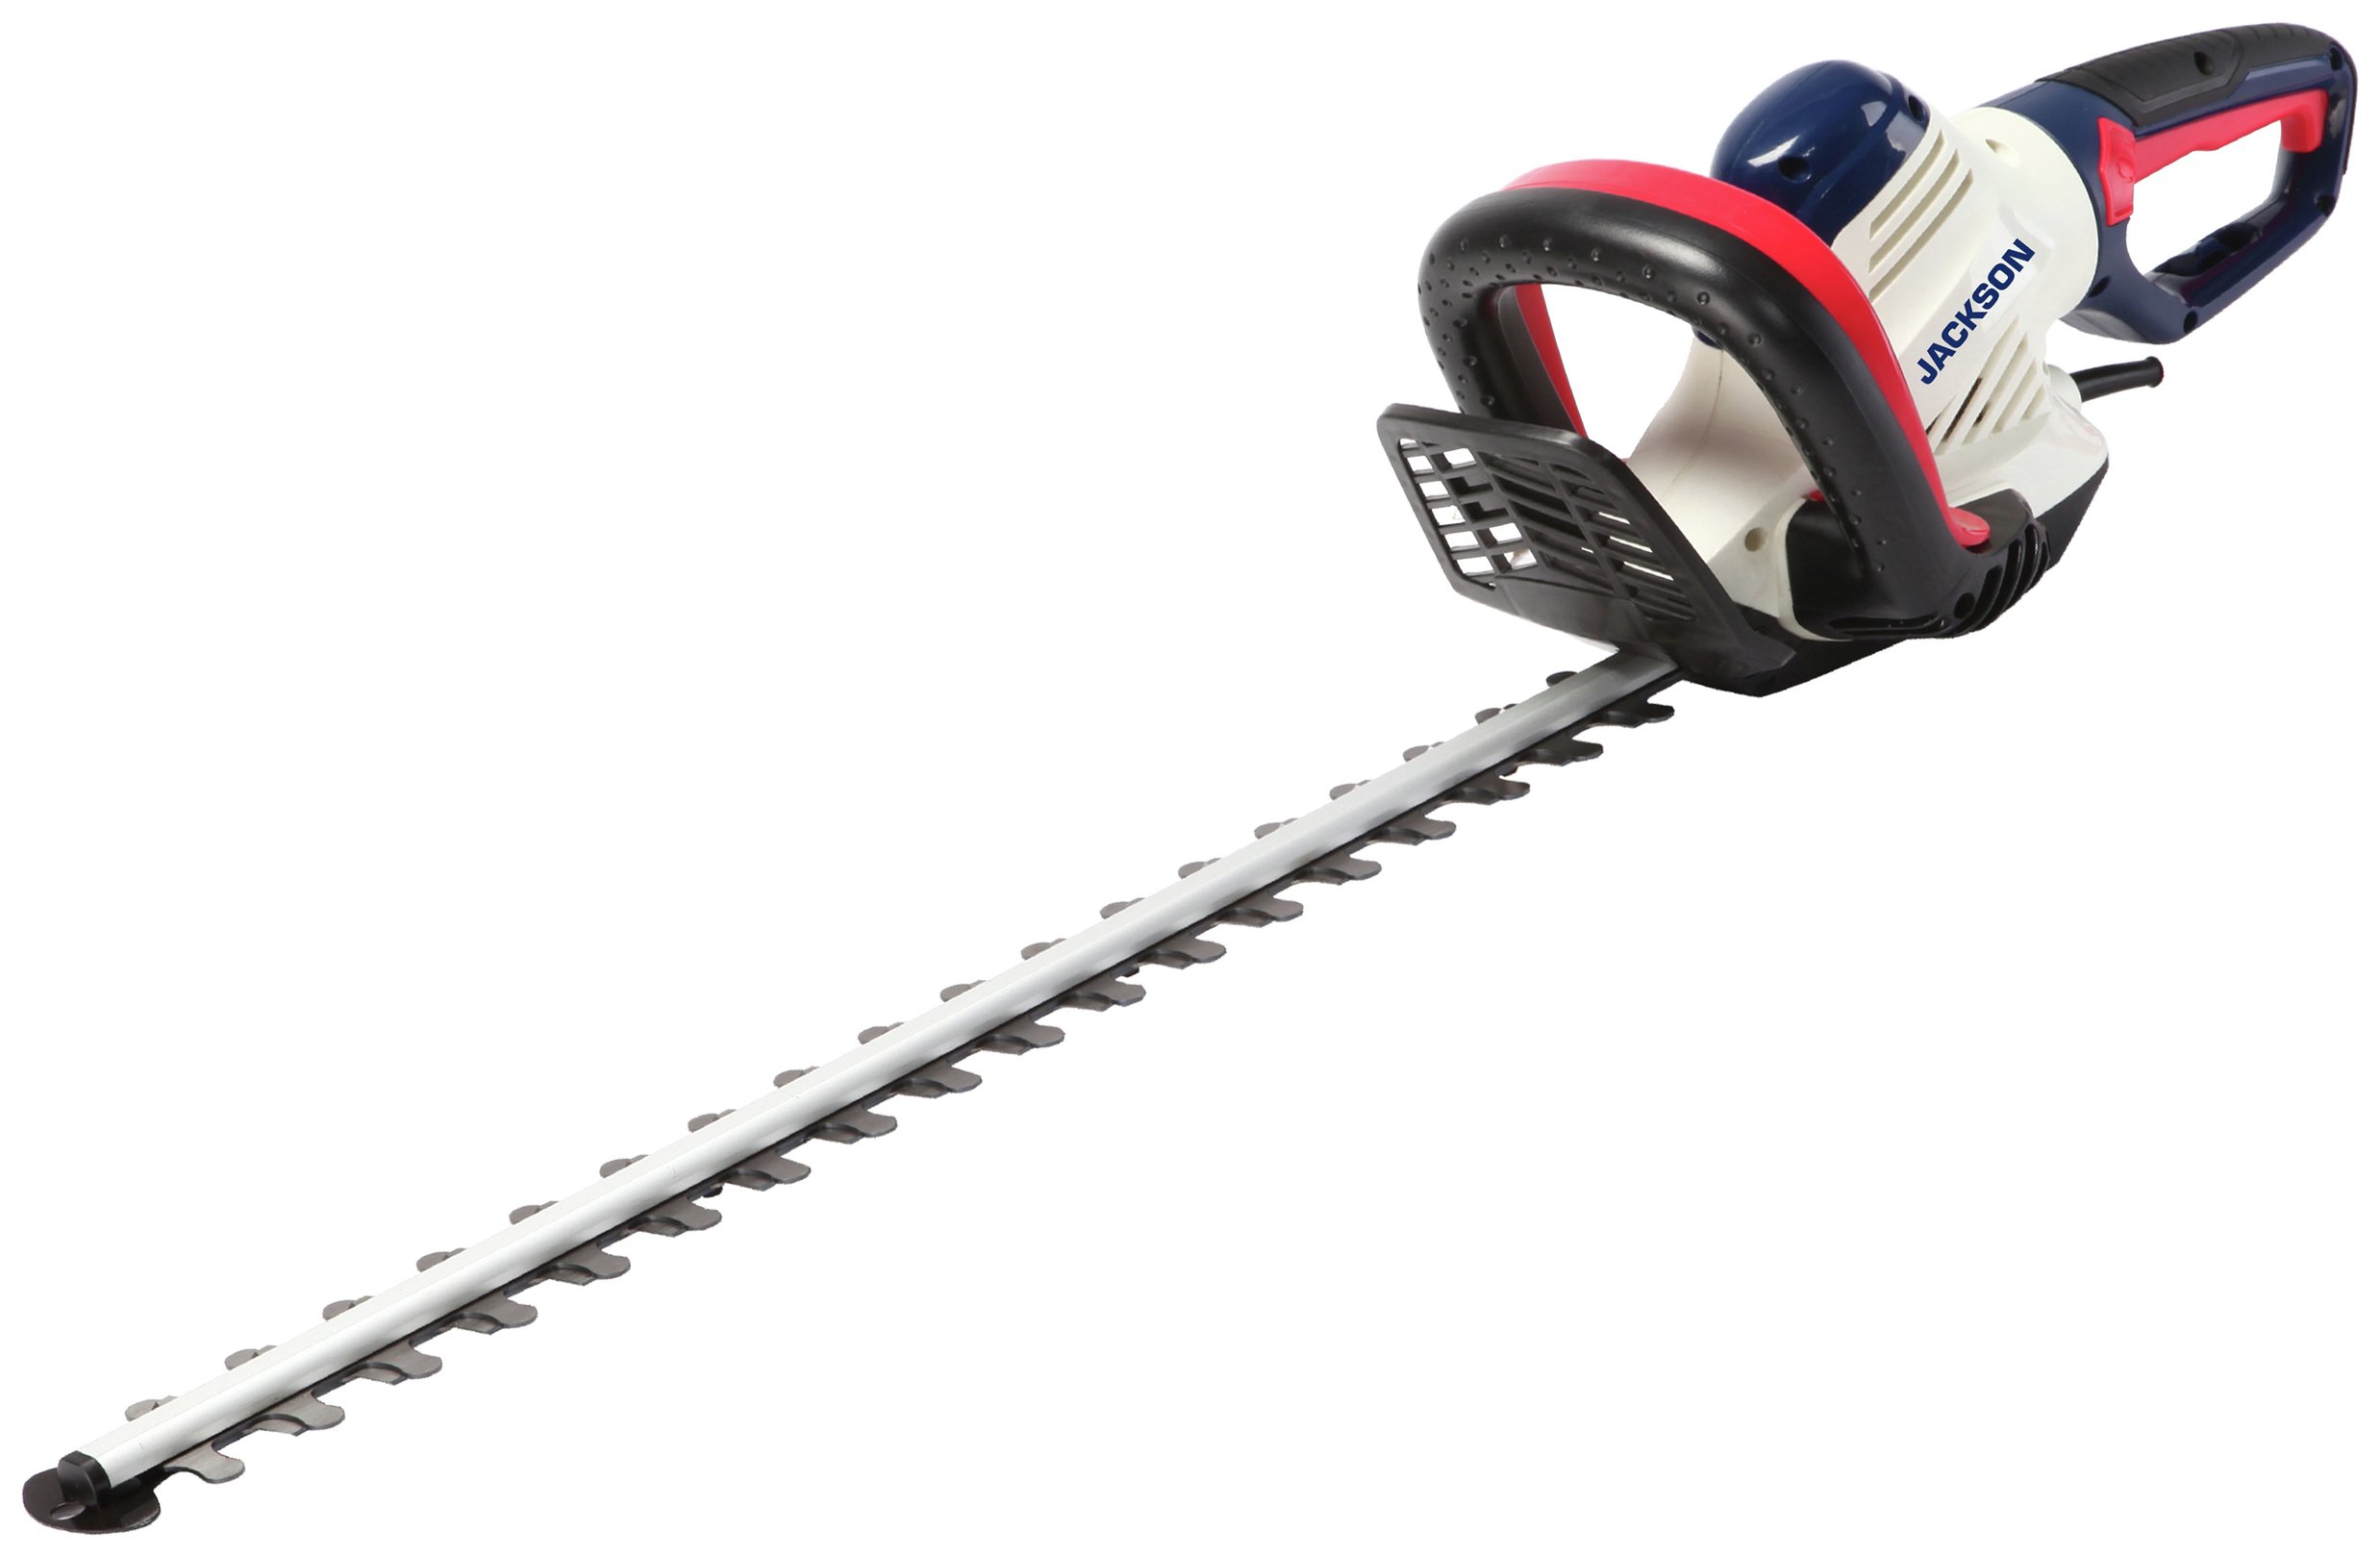 Spear and Jackson Corded Hedge Trimmer - 600W.